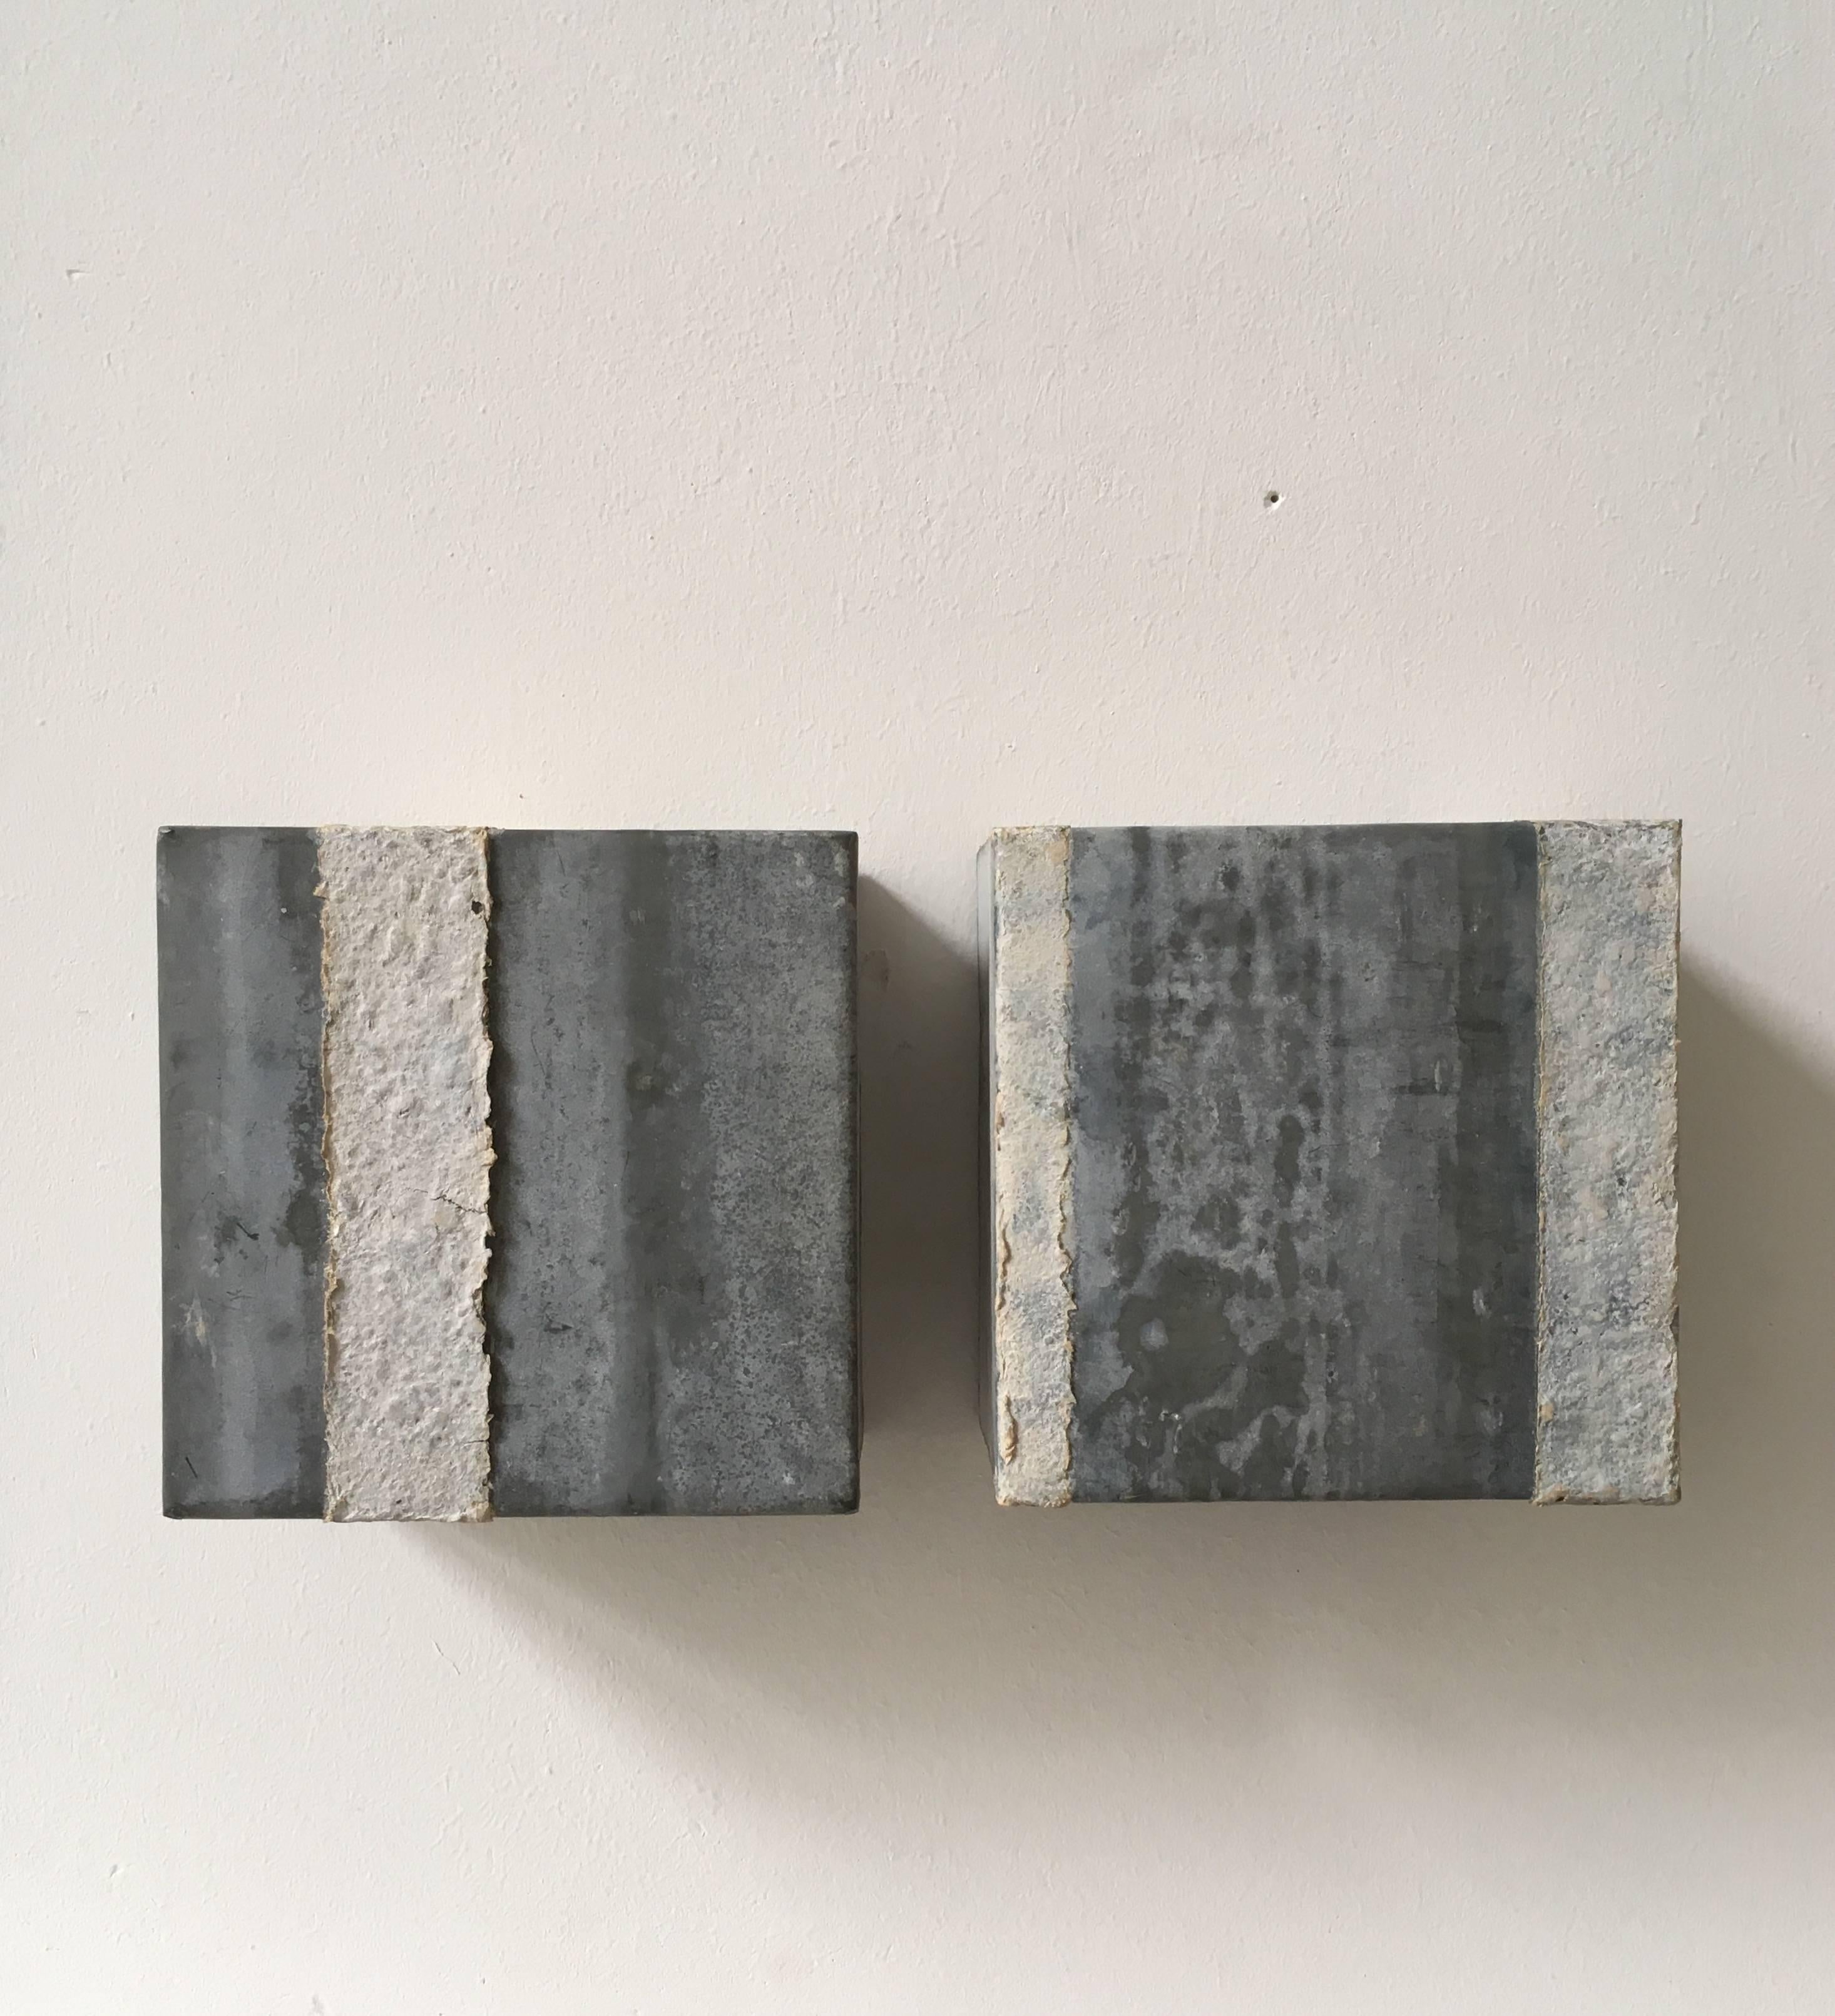 Two small wall sculptures, designed and manufactured by Dutch artist Manja Hazenberg in 2004. These cubes consist of a Zinc body with streaks of papier mâché. Excellent to give any space that minimalist touch.